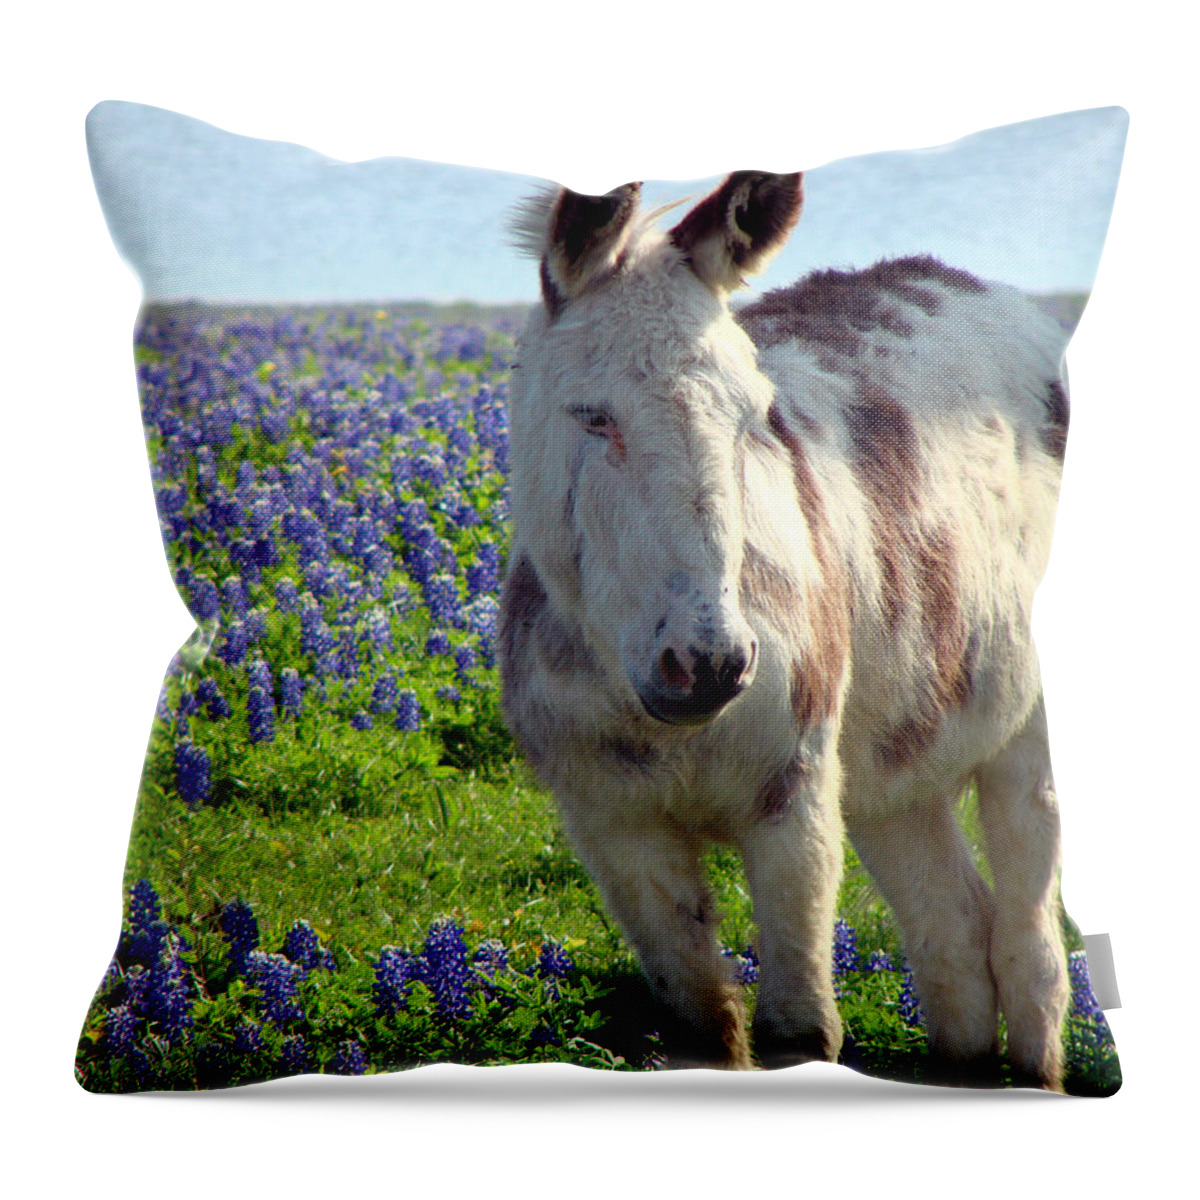 Donkey Throw Pillow featuring the photograph Jesus Donkey In Bluebonnets by Linda Cox